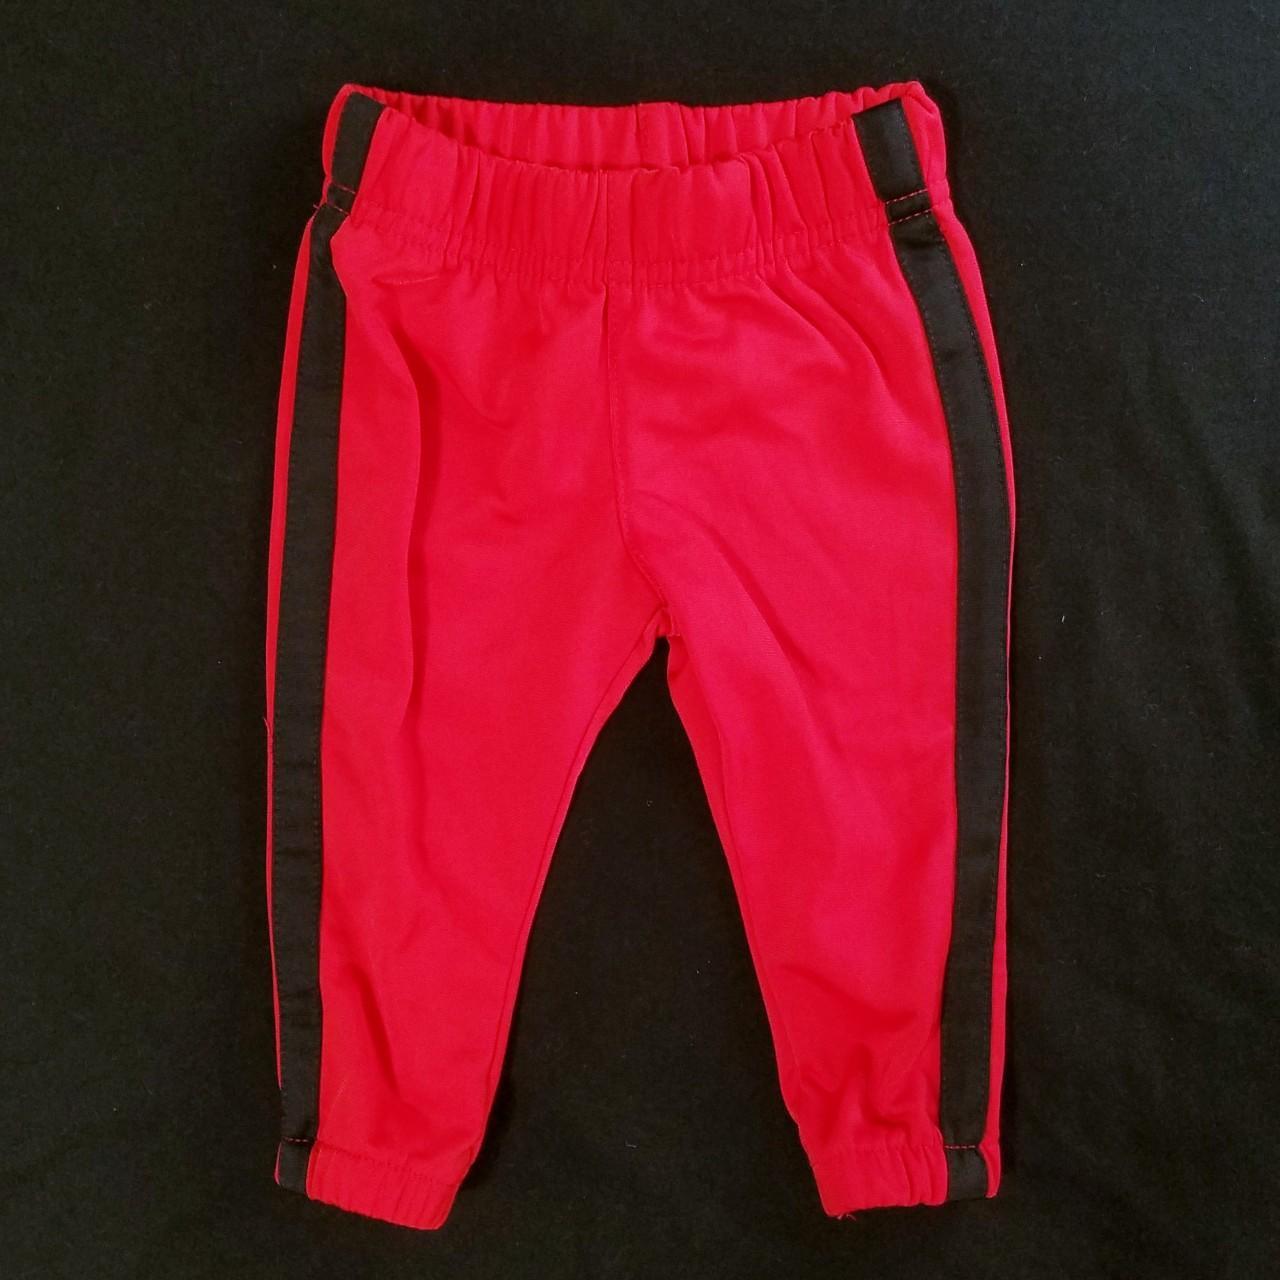 Red pants 9 months Boy Baby Clothes Red pants for... - Depop